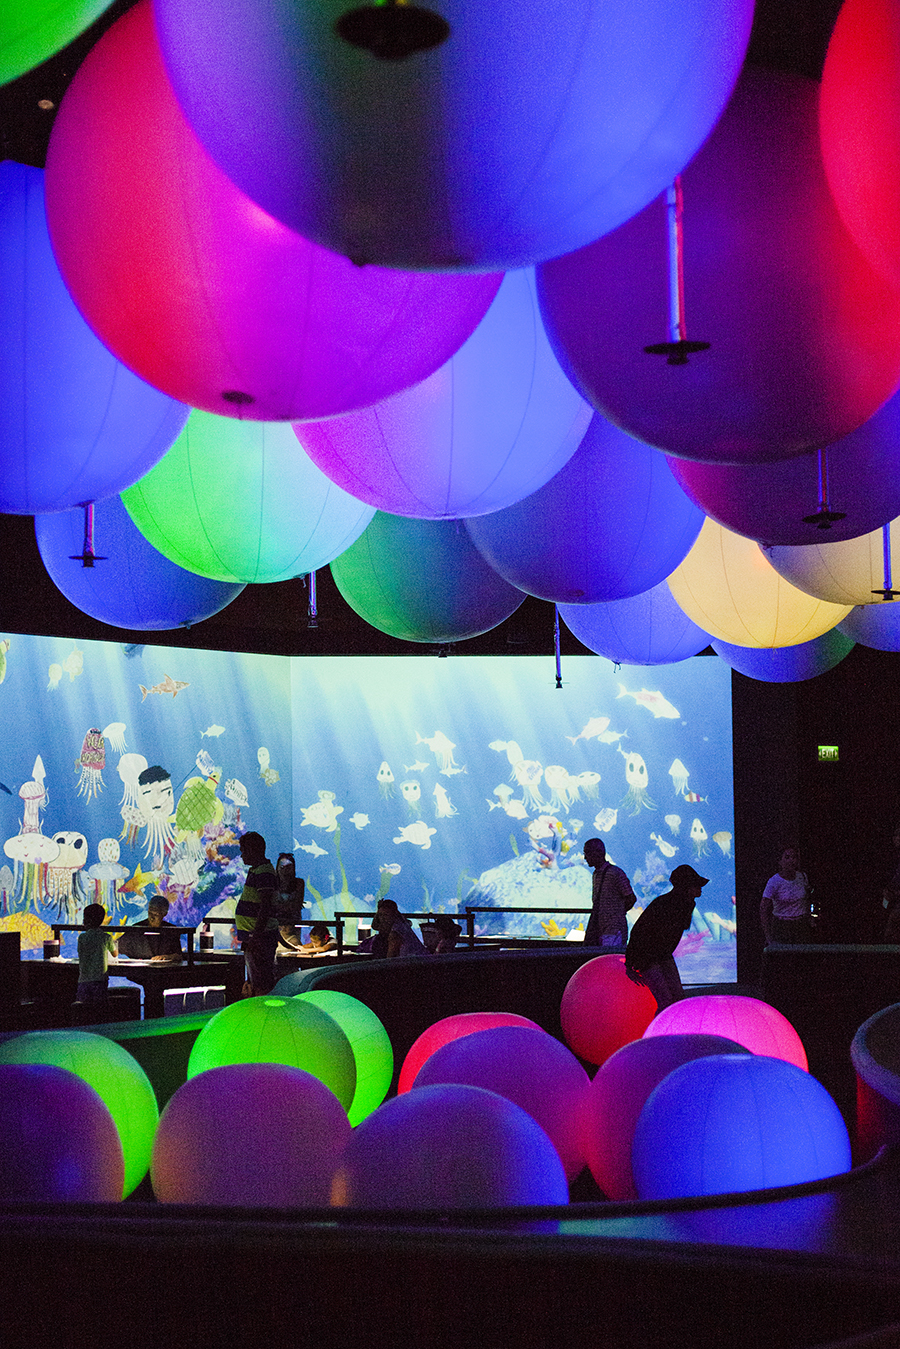 Light Ball Orchestra at the Future World exhibit at the ArtScience Museum, Singapore.